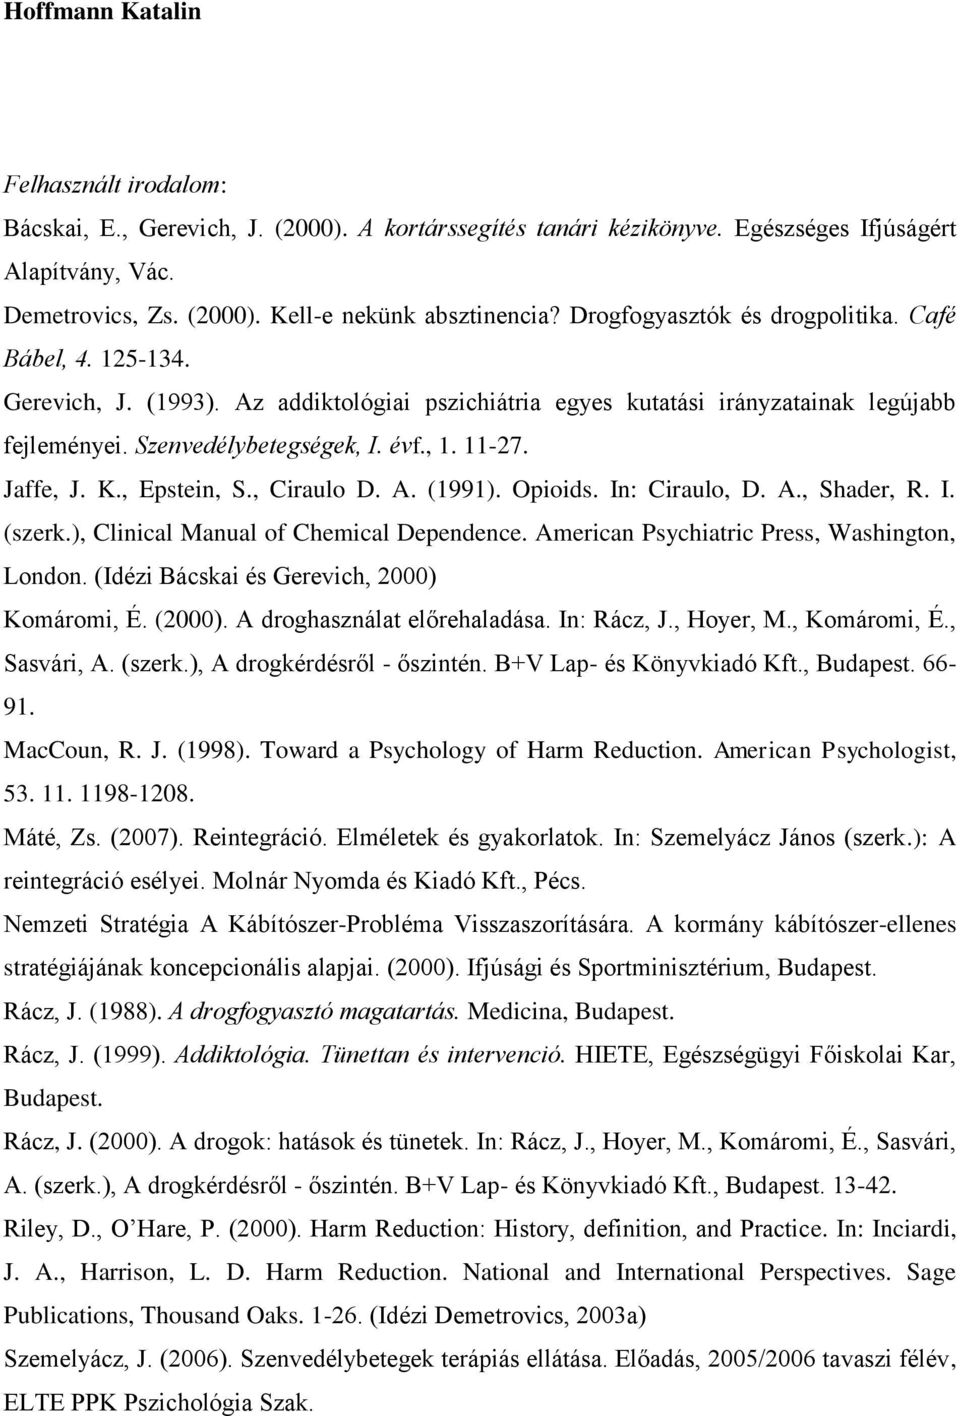 Jaffe, J. K., Epstein, S., Ciraulo D. A. (1991). Opioids. In: Ciraulo, D. A., Shader, R. I. (szerk.), Clinical Manual of Chemical Dependence. American Psychiatric Press, Washington, London.